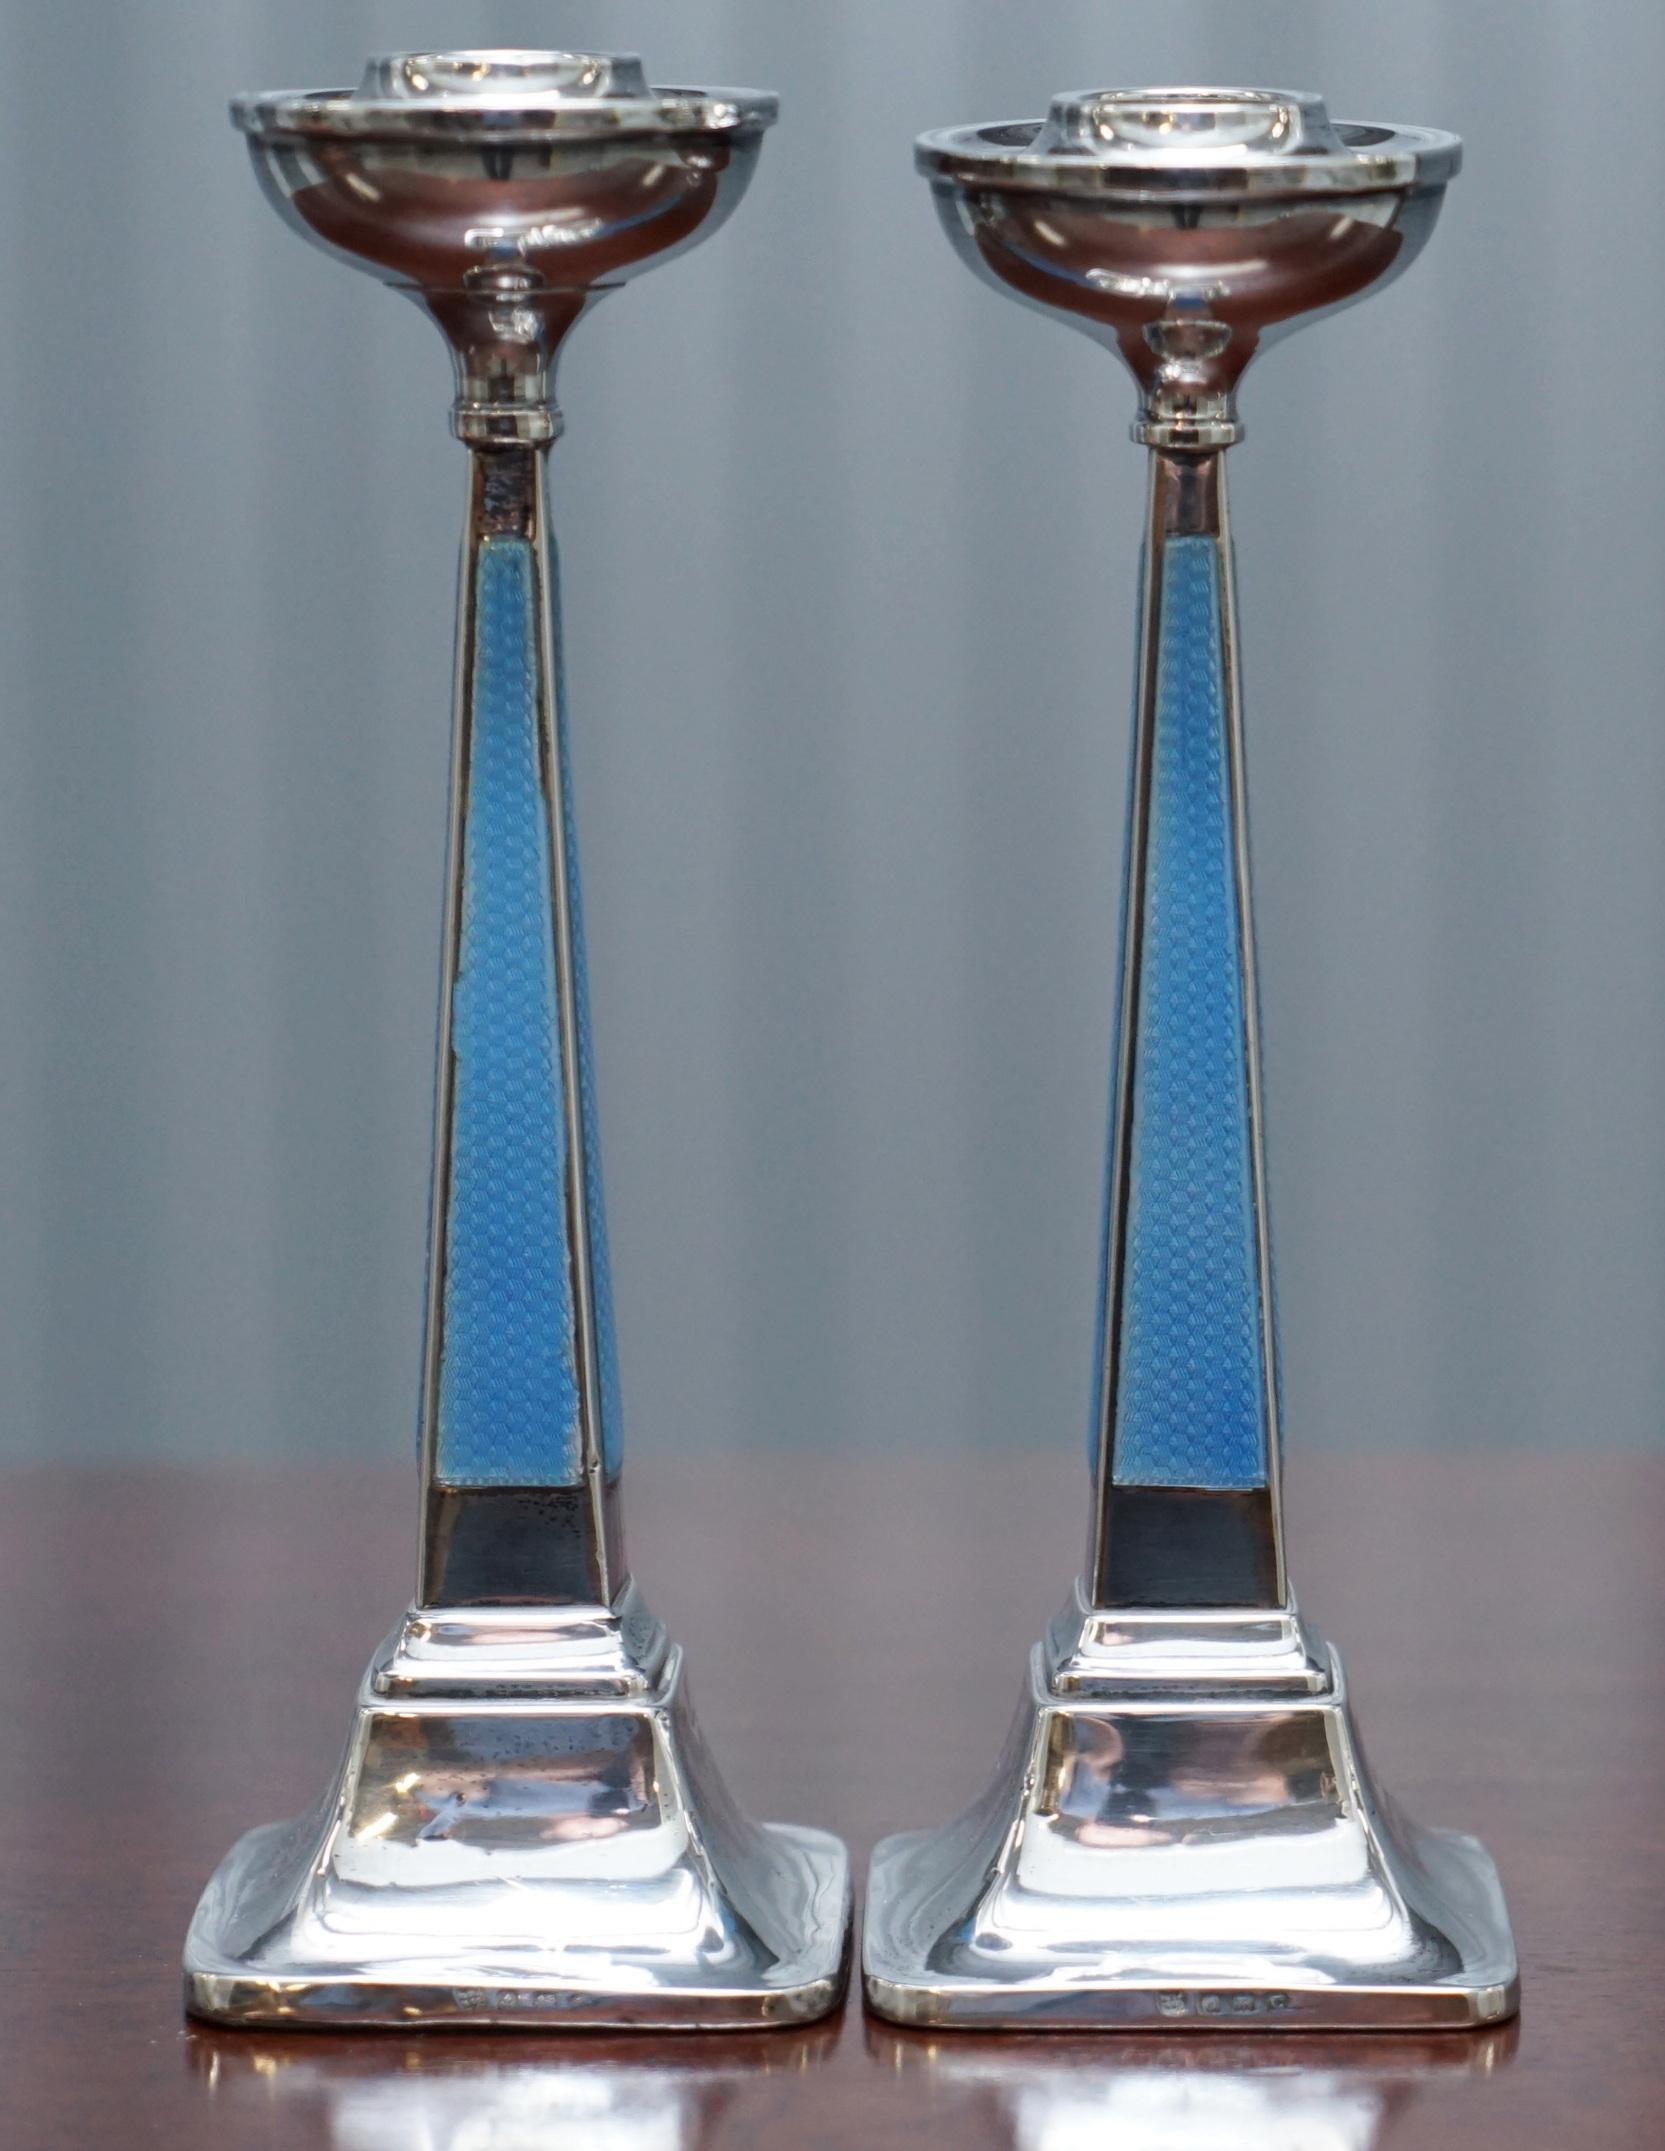 We are delighted to offer for sale this lovely pair of original 1927 Sterling Silver Guilloche Enamel candlesticks by Charles Green & Co

A well made and decorative pair, fully hallmarked 1927, the Birmingham anchor and the sideways facing Lion